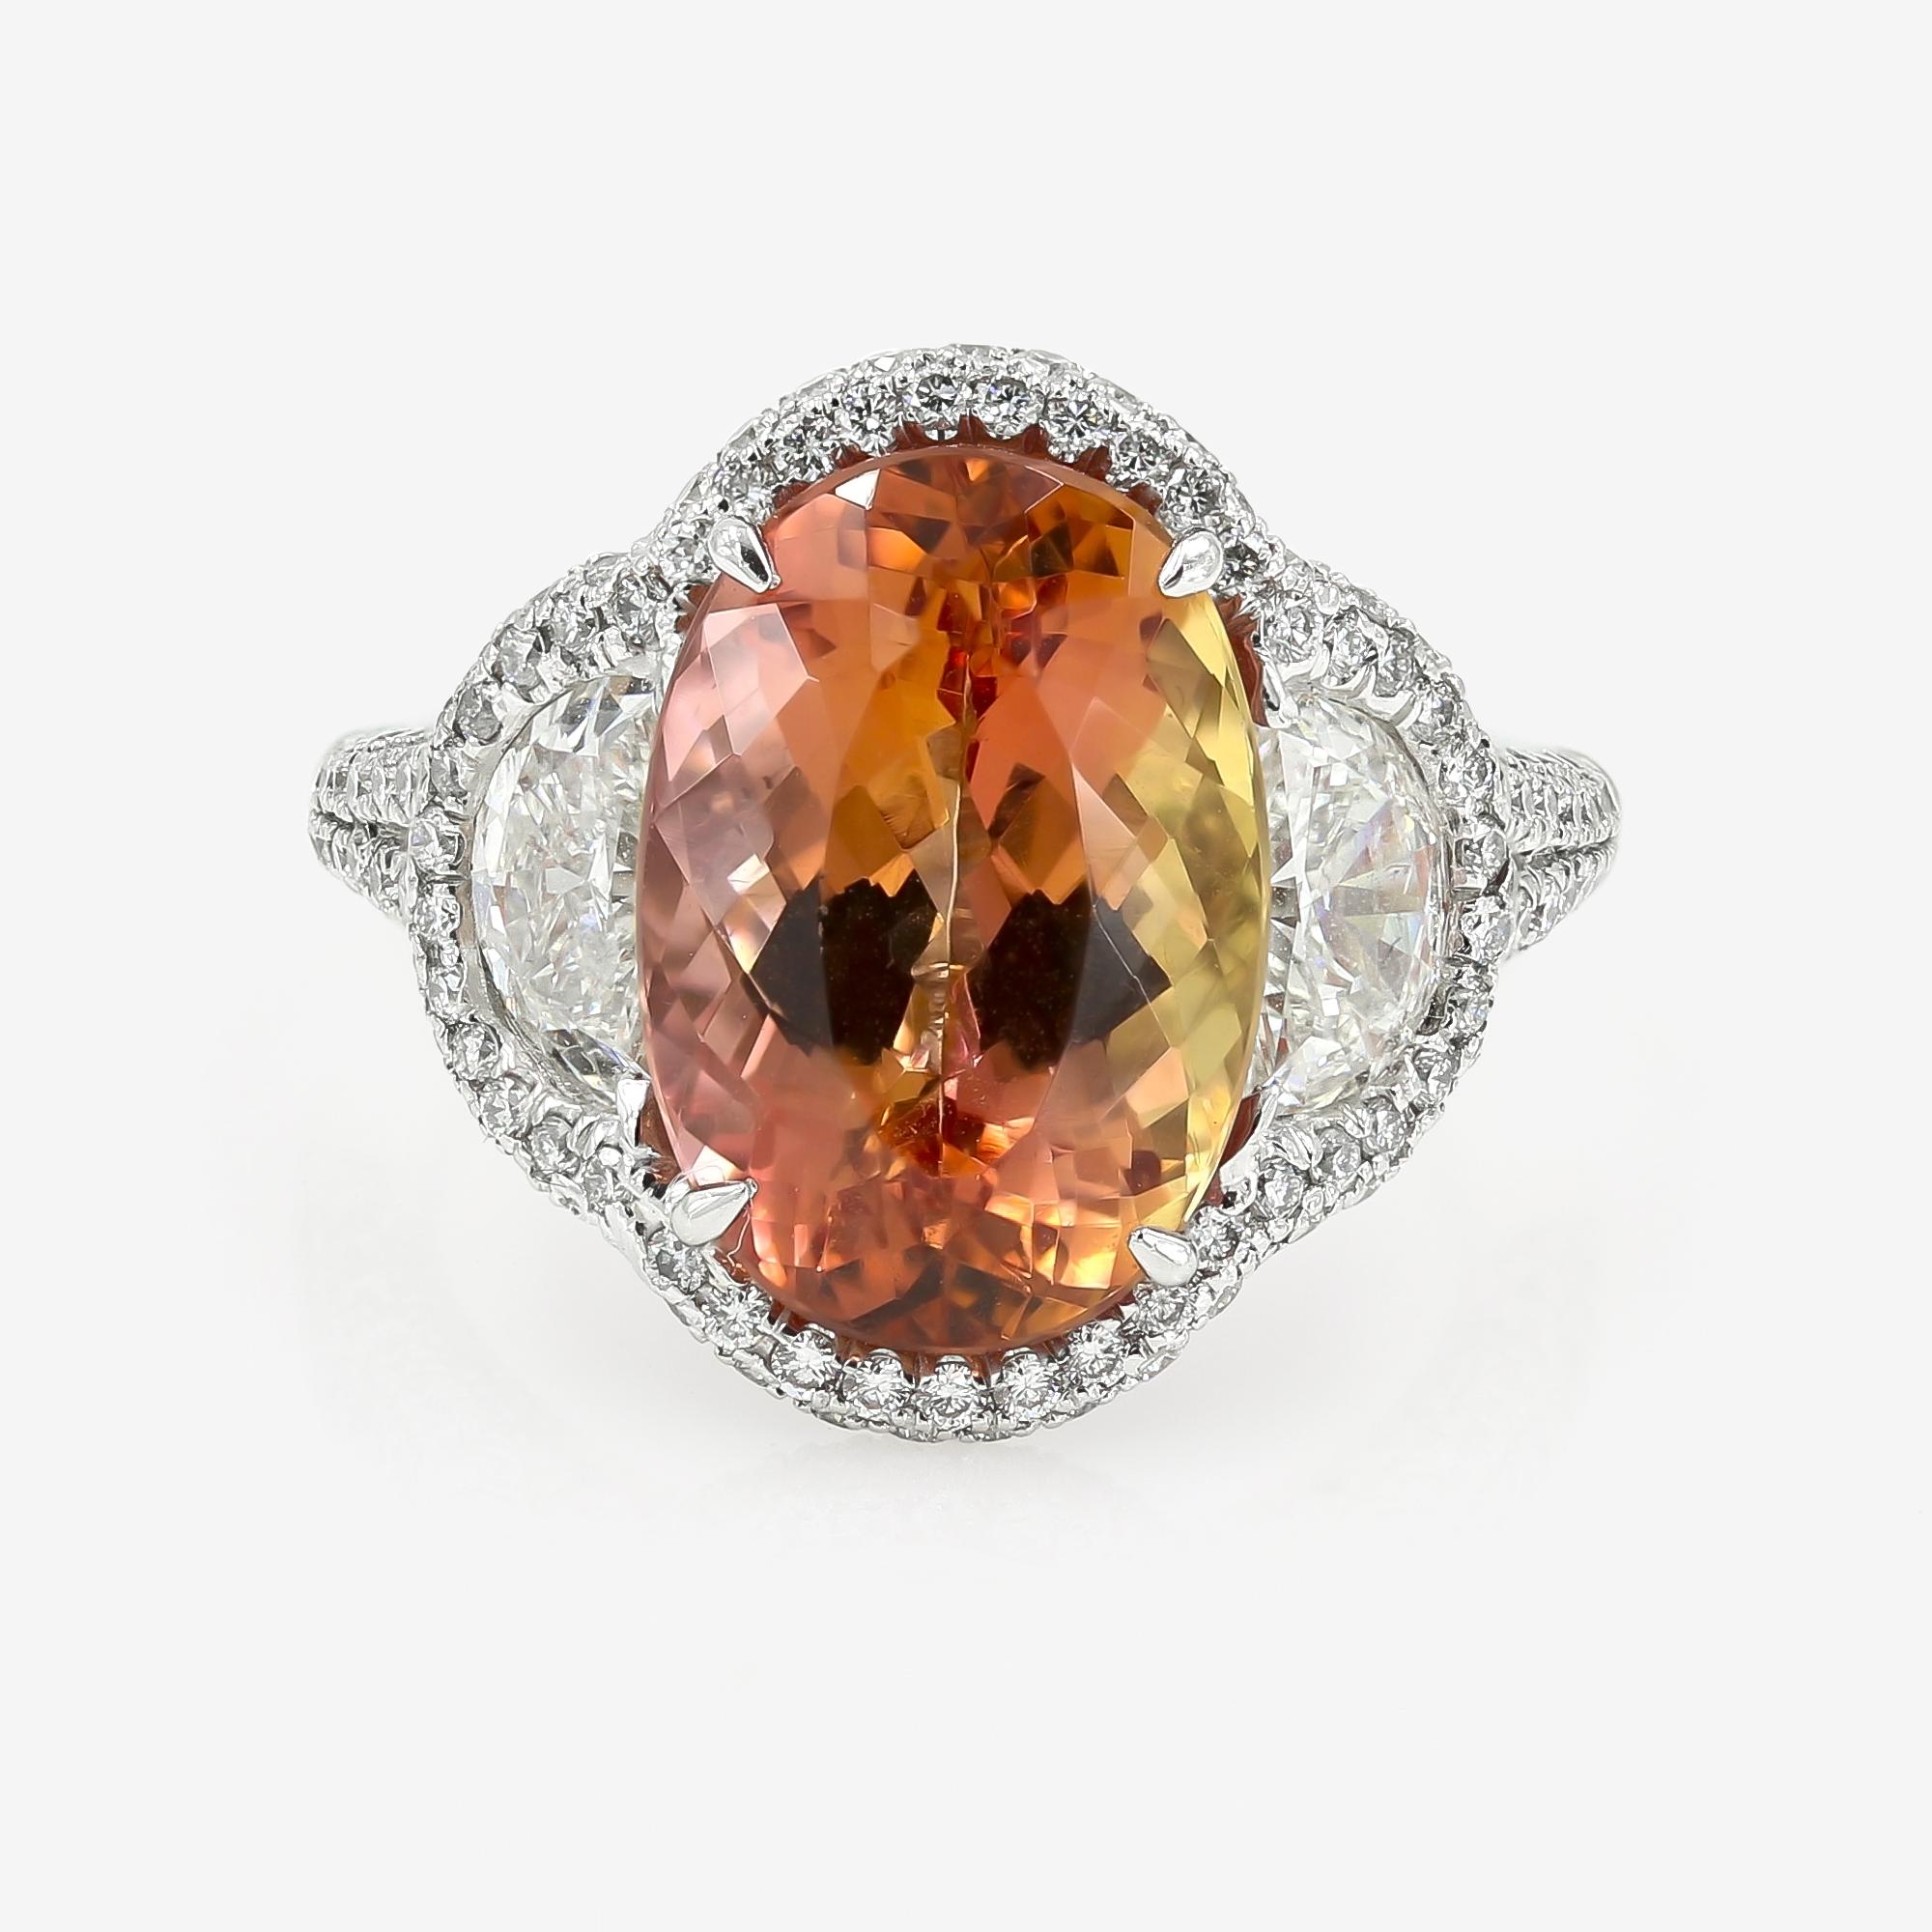 This vibrant rich colored 7.56cts. oval cut Imperial Topaz is set in platinum with 2 half-moon cut diamonds = 1.15cts. t.w. on the sides which are each set in a semi-halo setting. In addition, there are 227 round cut diamonds = 1.35cts. t.w. around